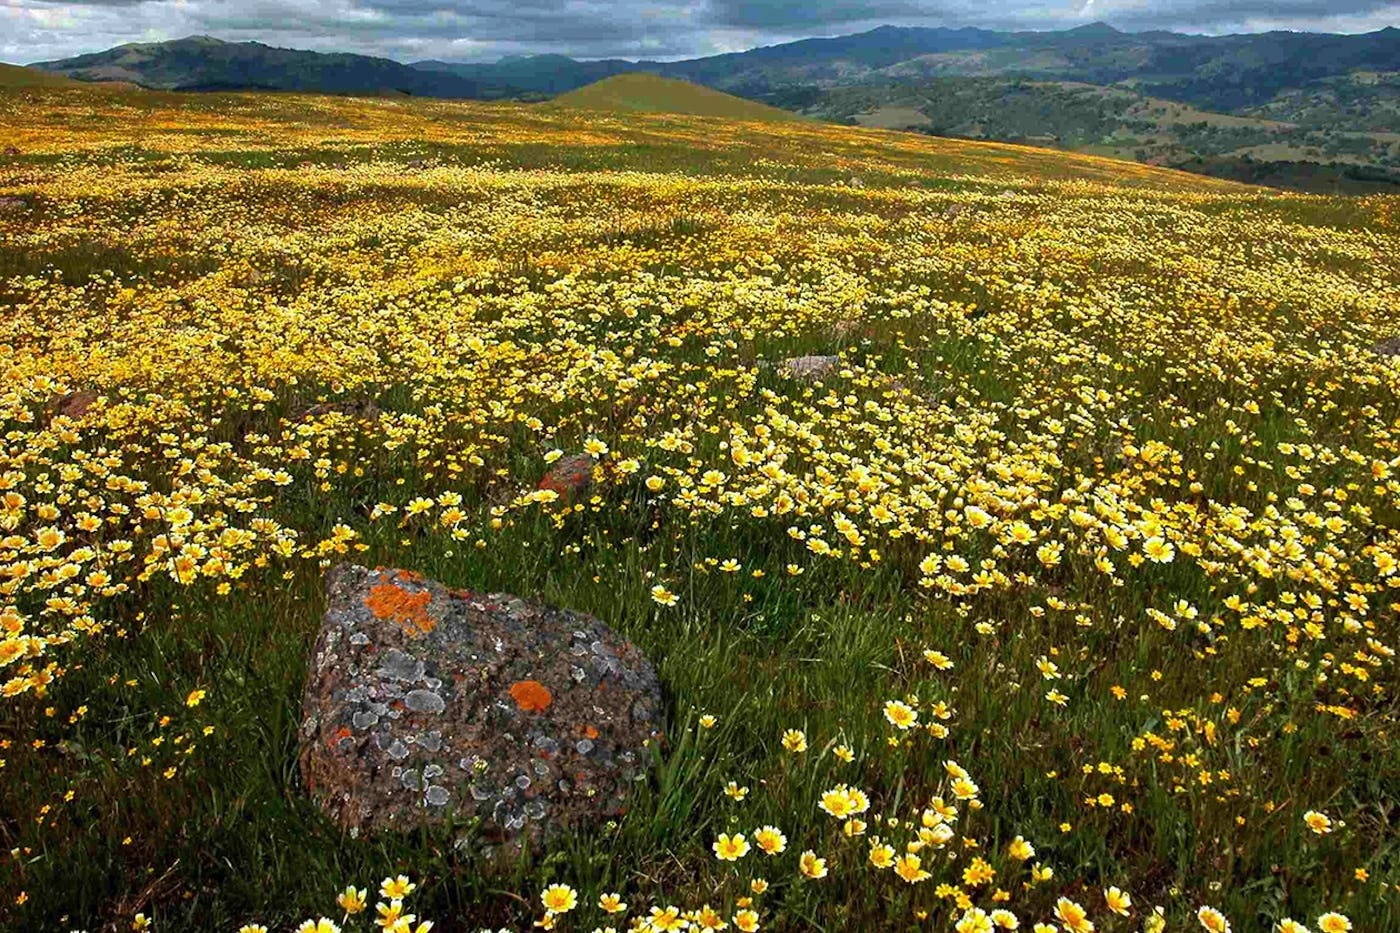 A meadow with yellow wildflowers